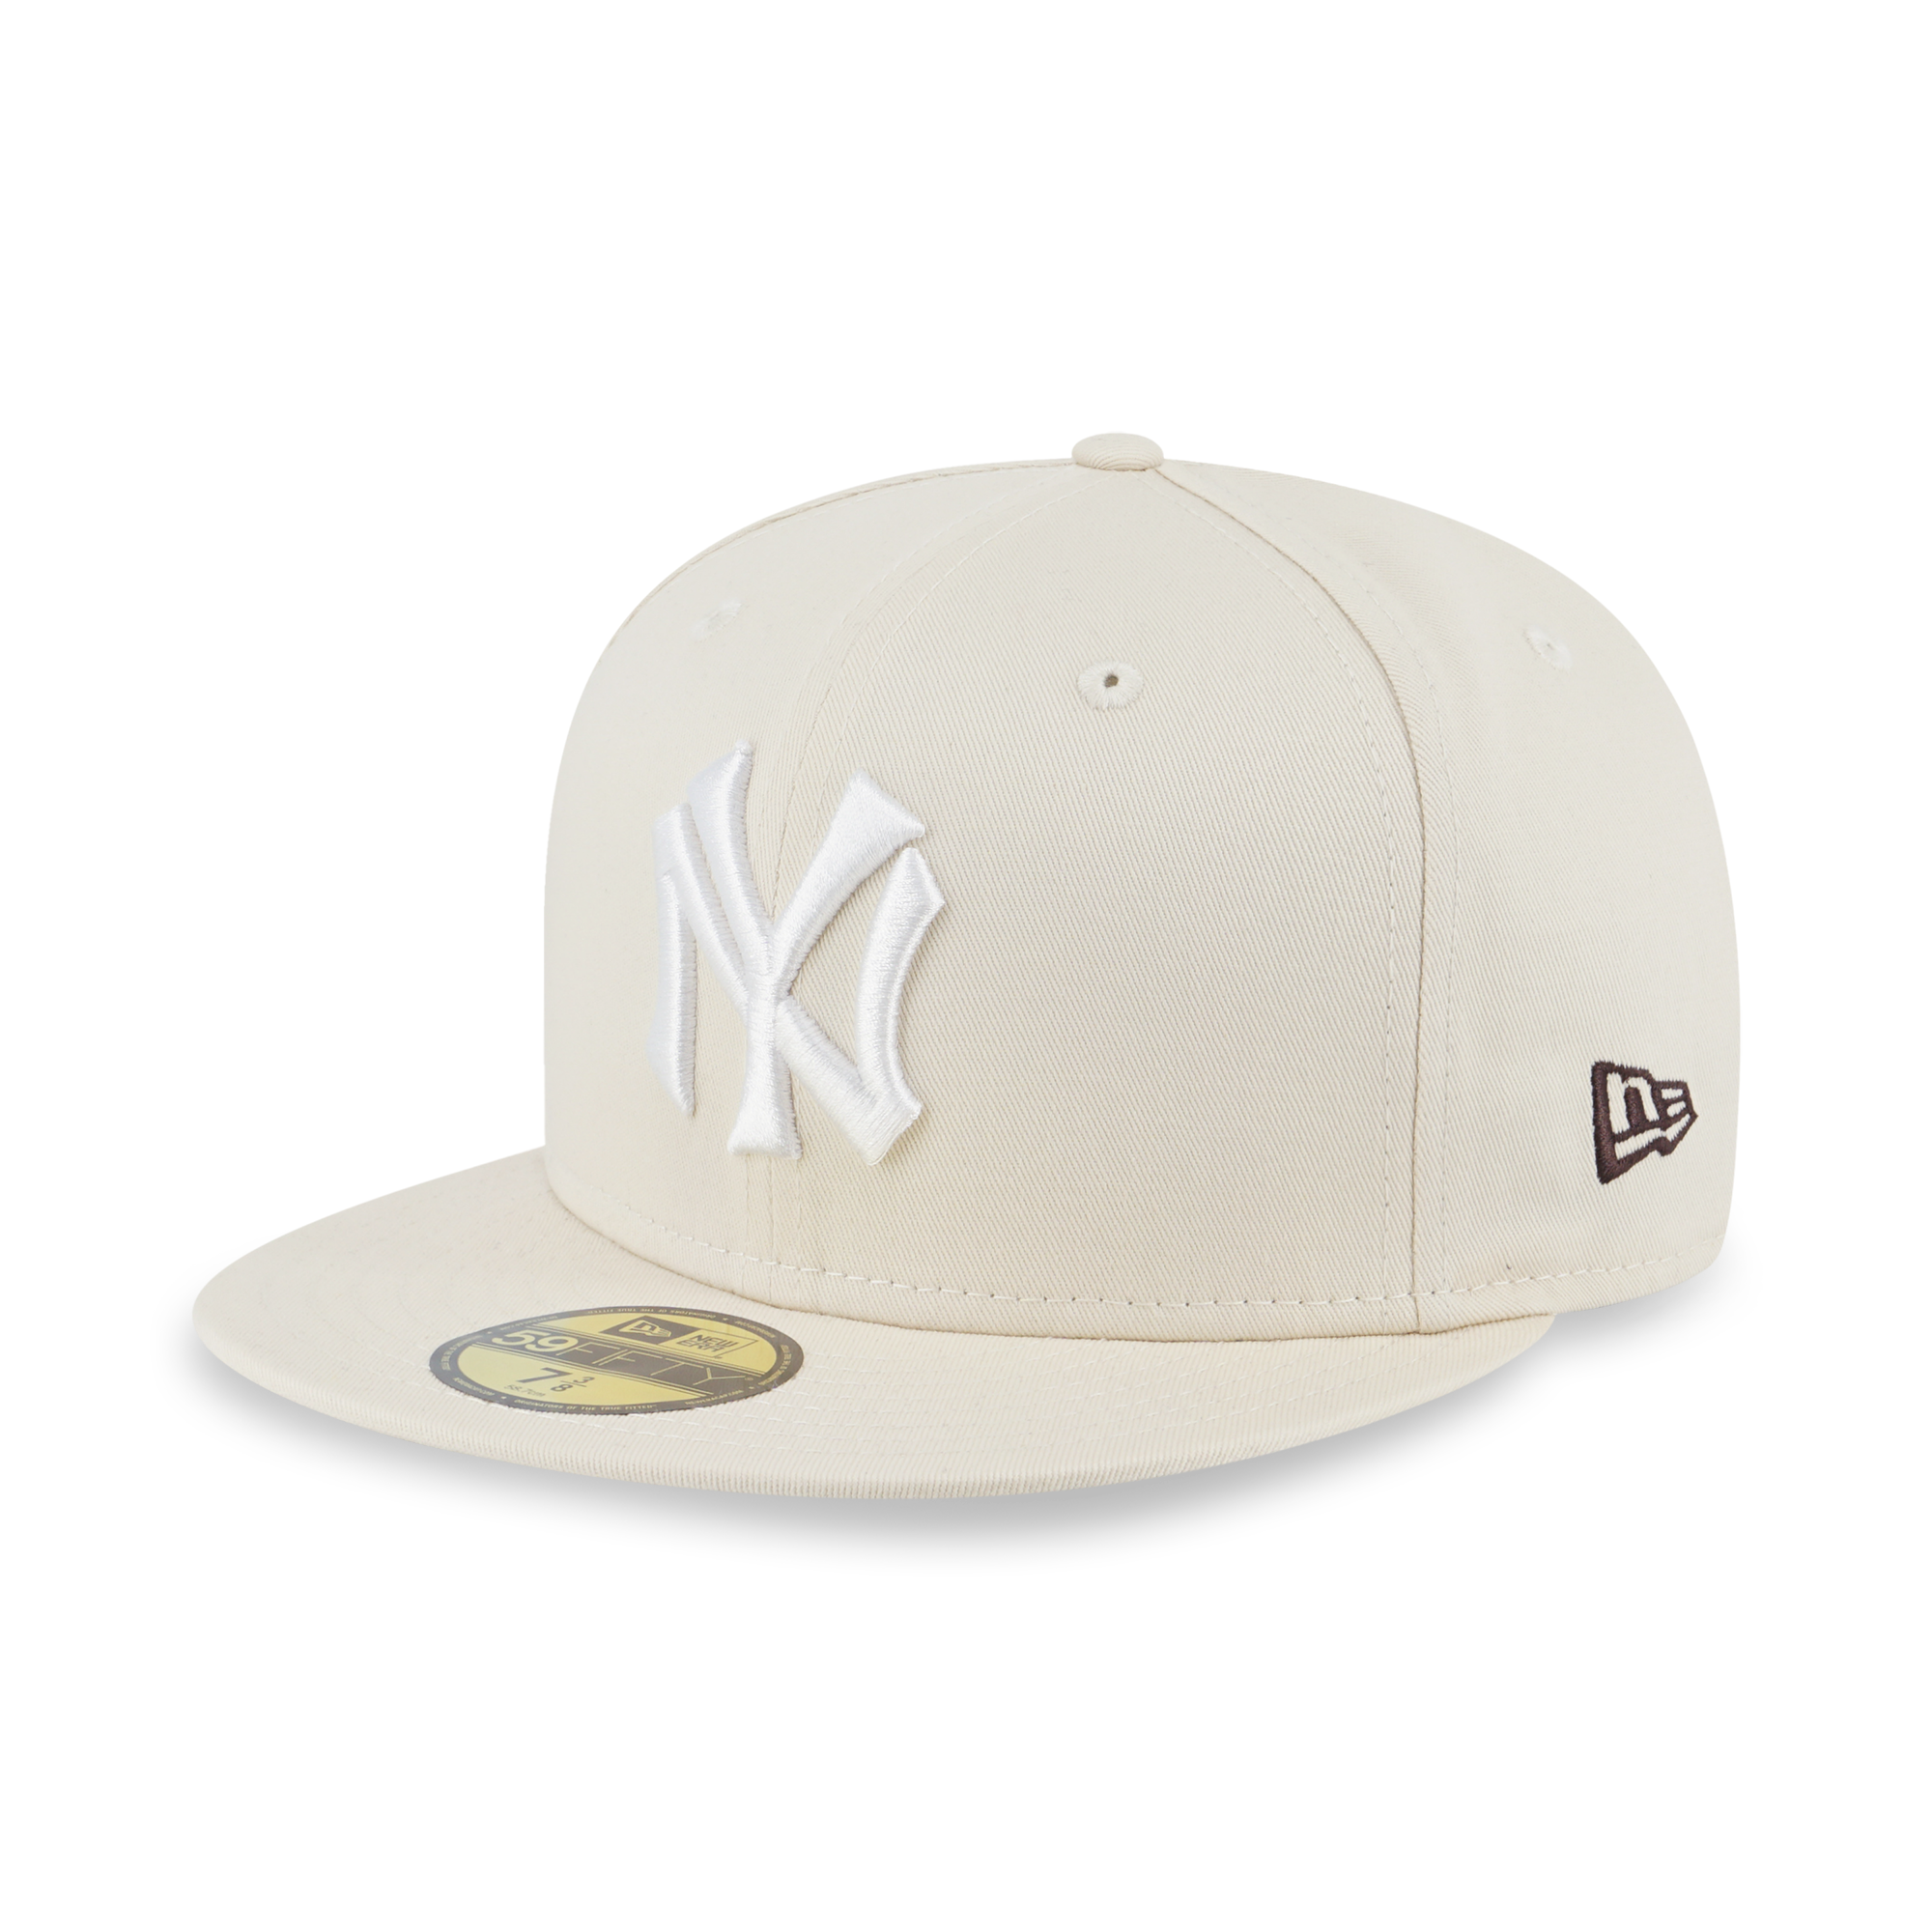 59FIFTY PACK - COCONUT NEW YORK YANKEES COOPERSTOWN LIGHT CREAM 59FIFTY CAP